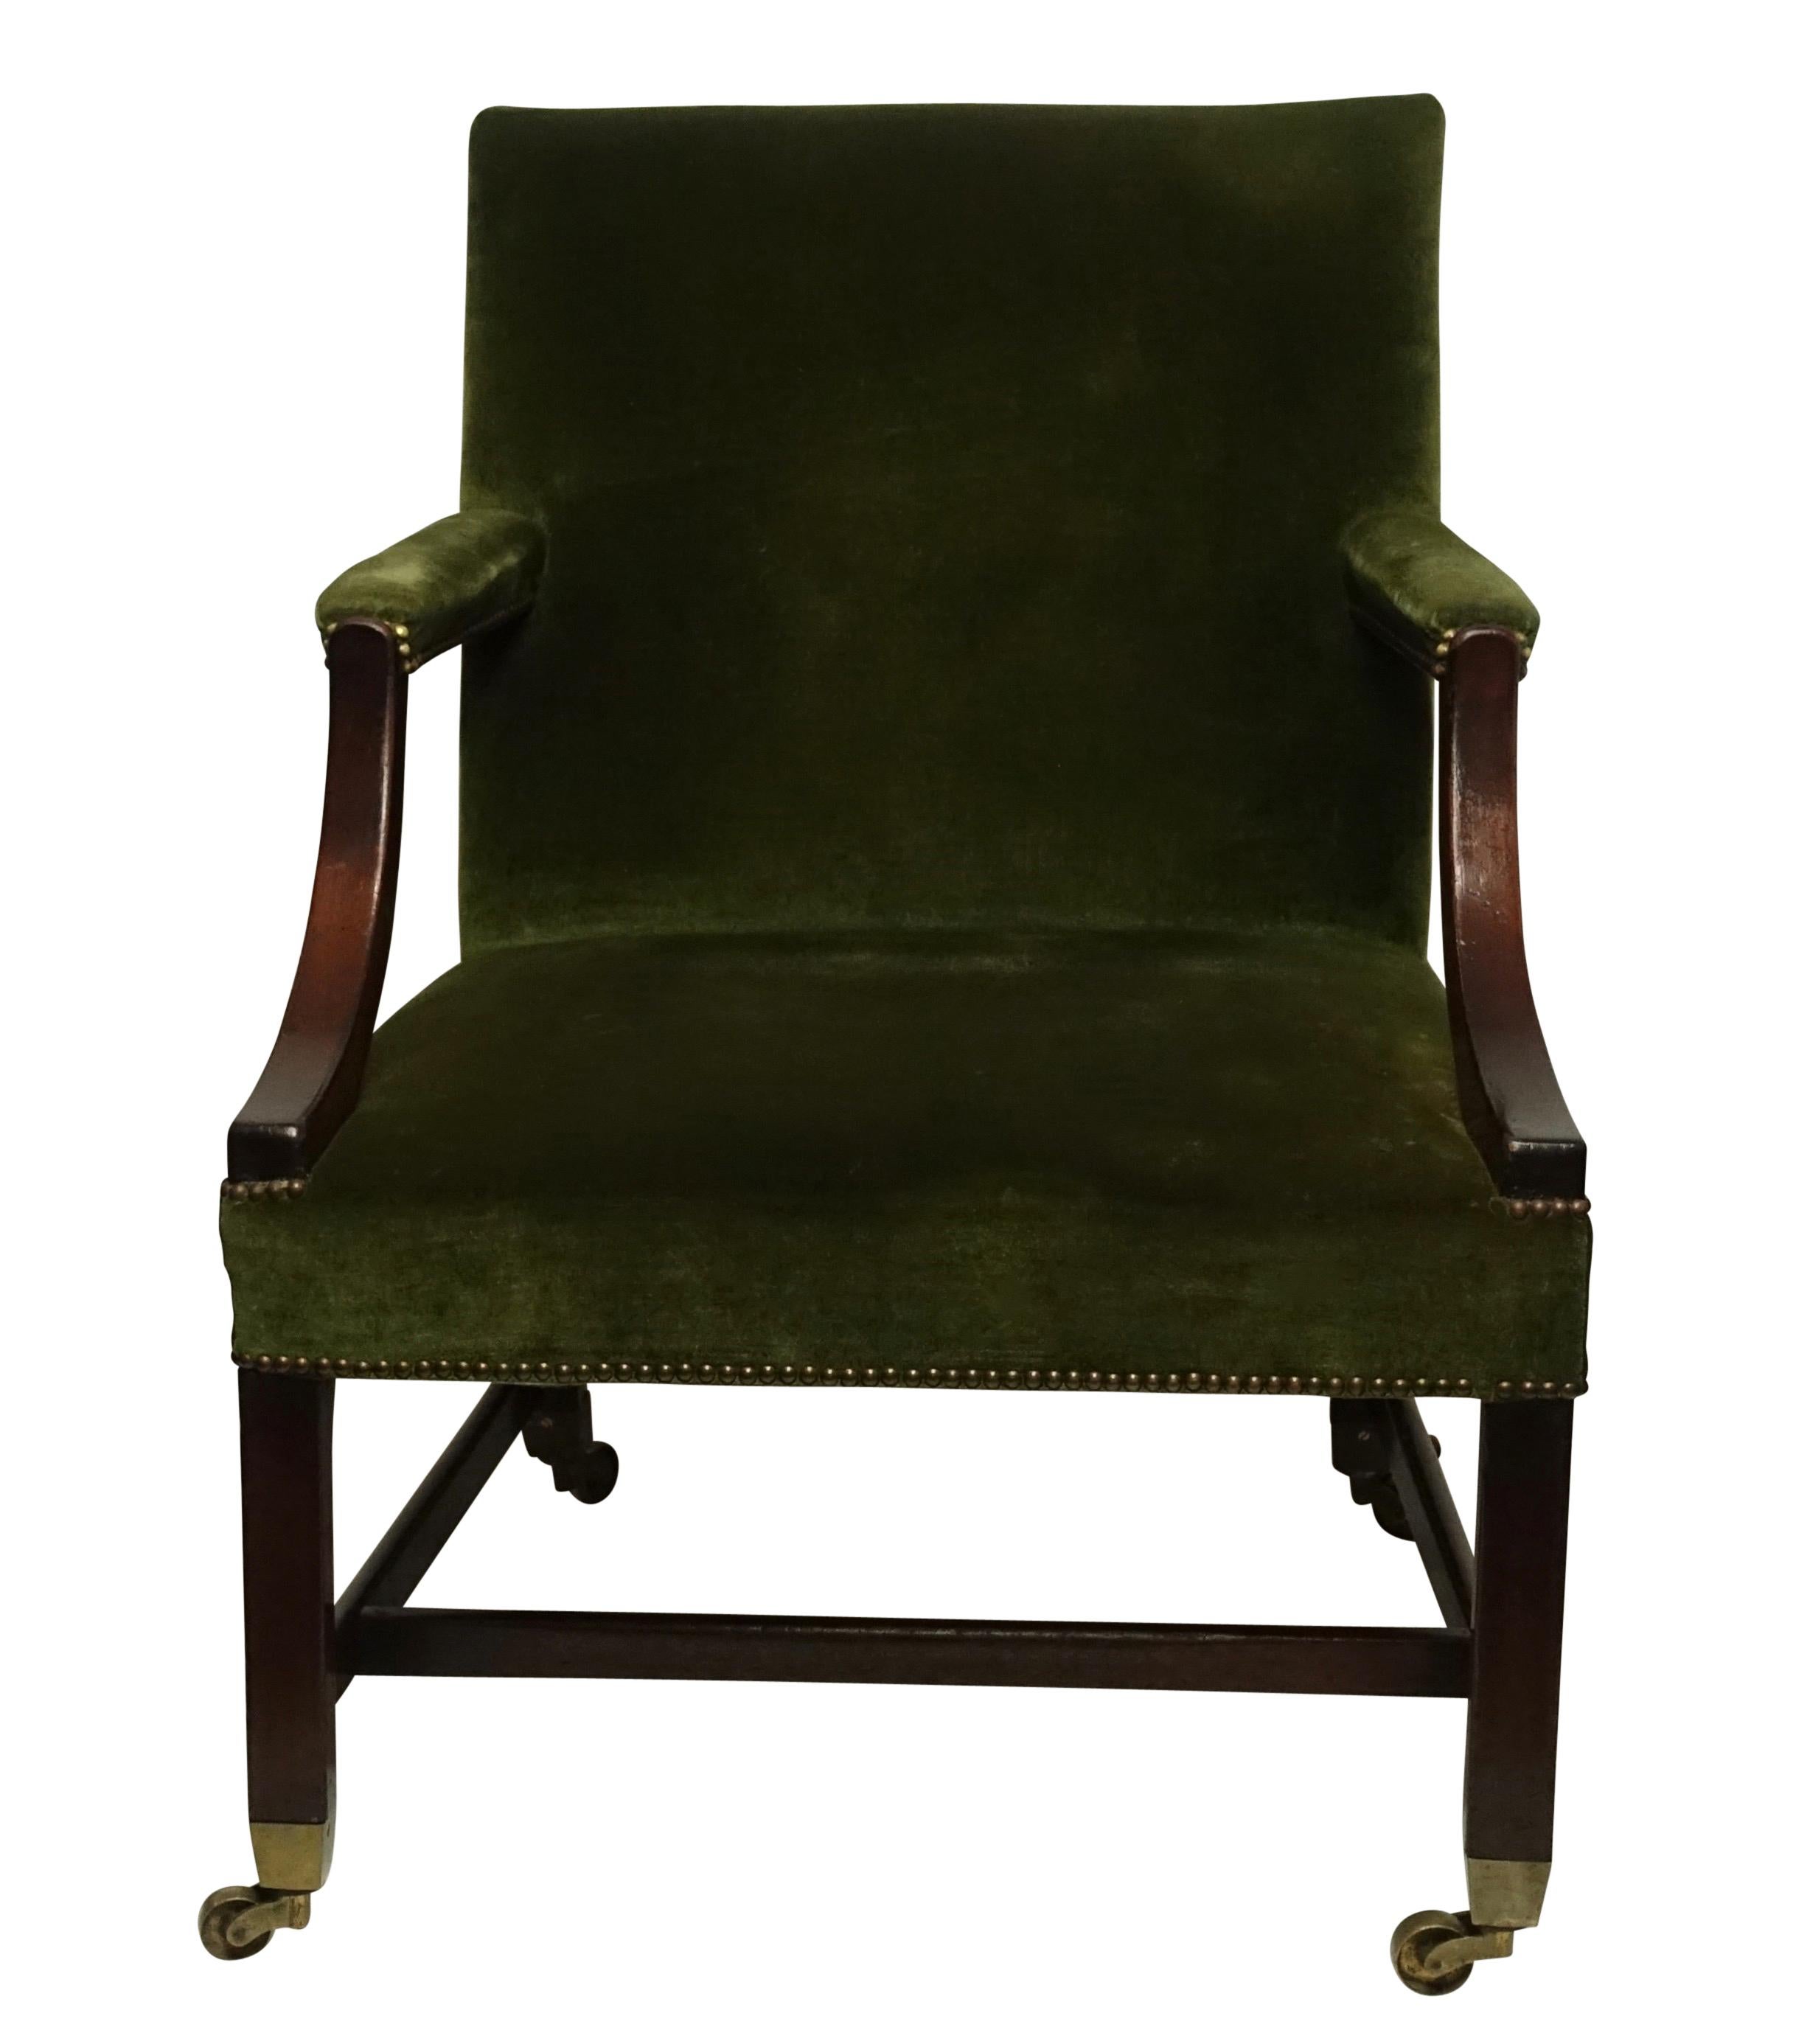 A commodious Georgian style mahogany library armchair with down swept arms, brass tacking accenting the vintage mohair upholstery, the square beam legs ending in substantial brass cup and caster feet. England, circa 1780.